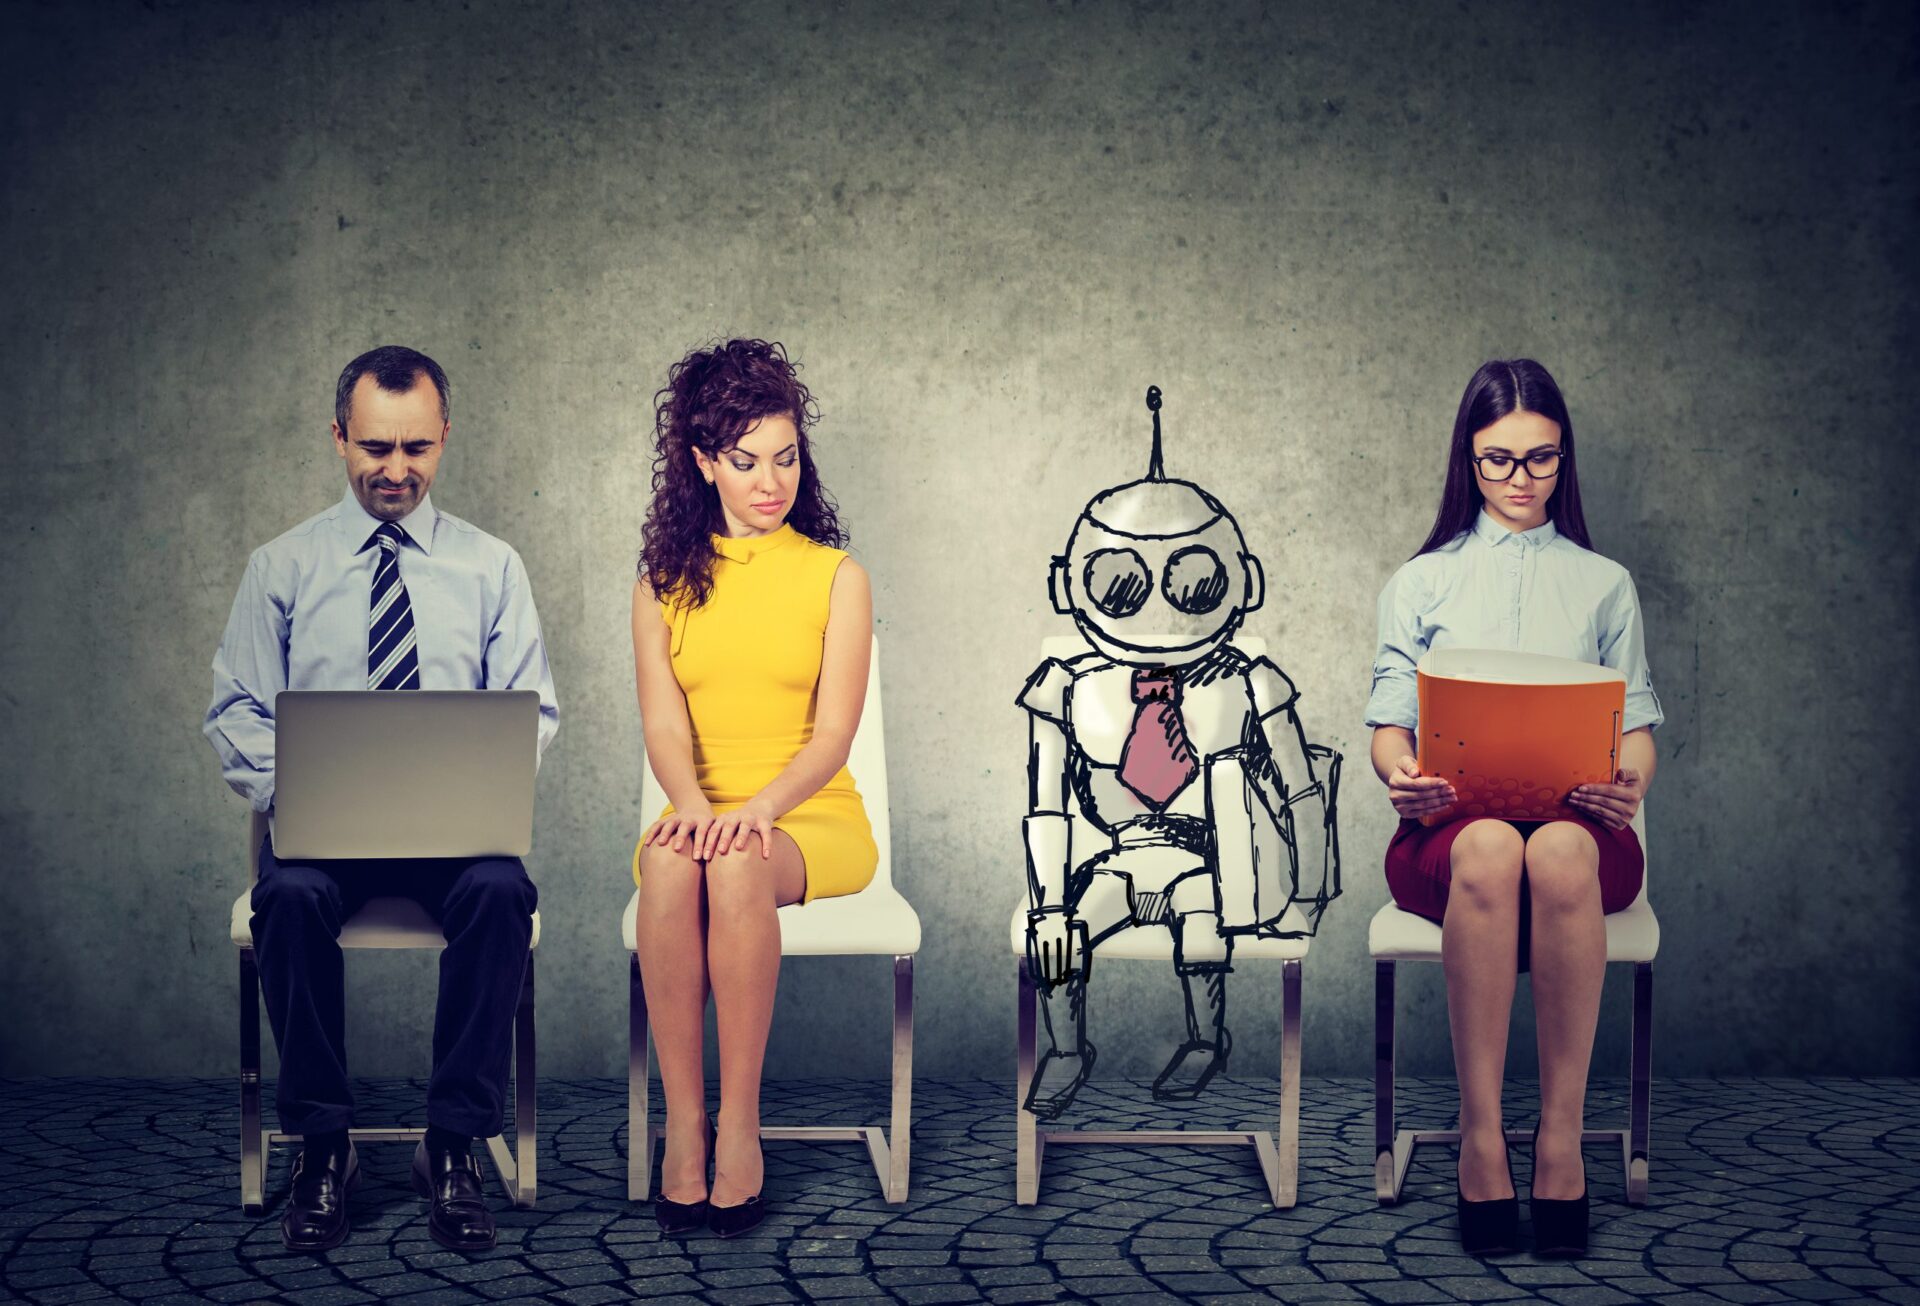 Photo of a robot sat amongst other people at a job interview